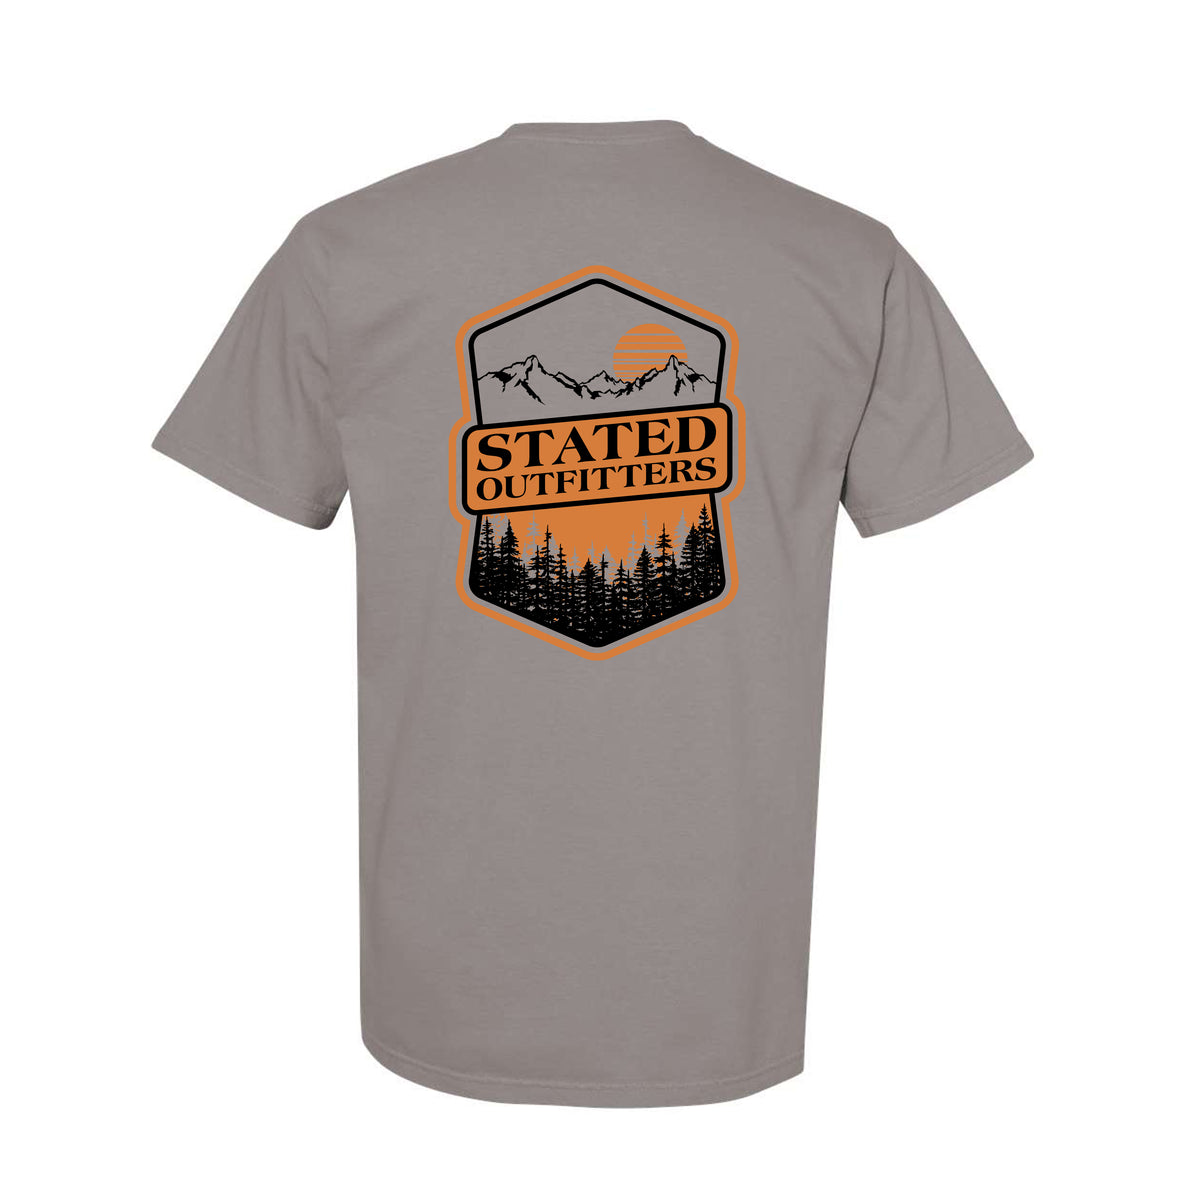 Stated Outfitters Mountain Badge T-Shirt